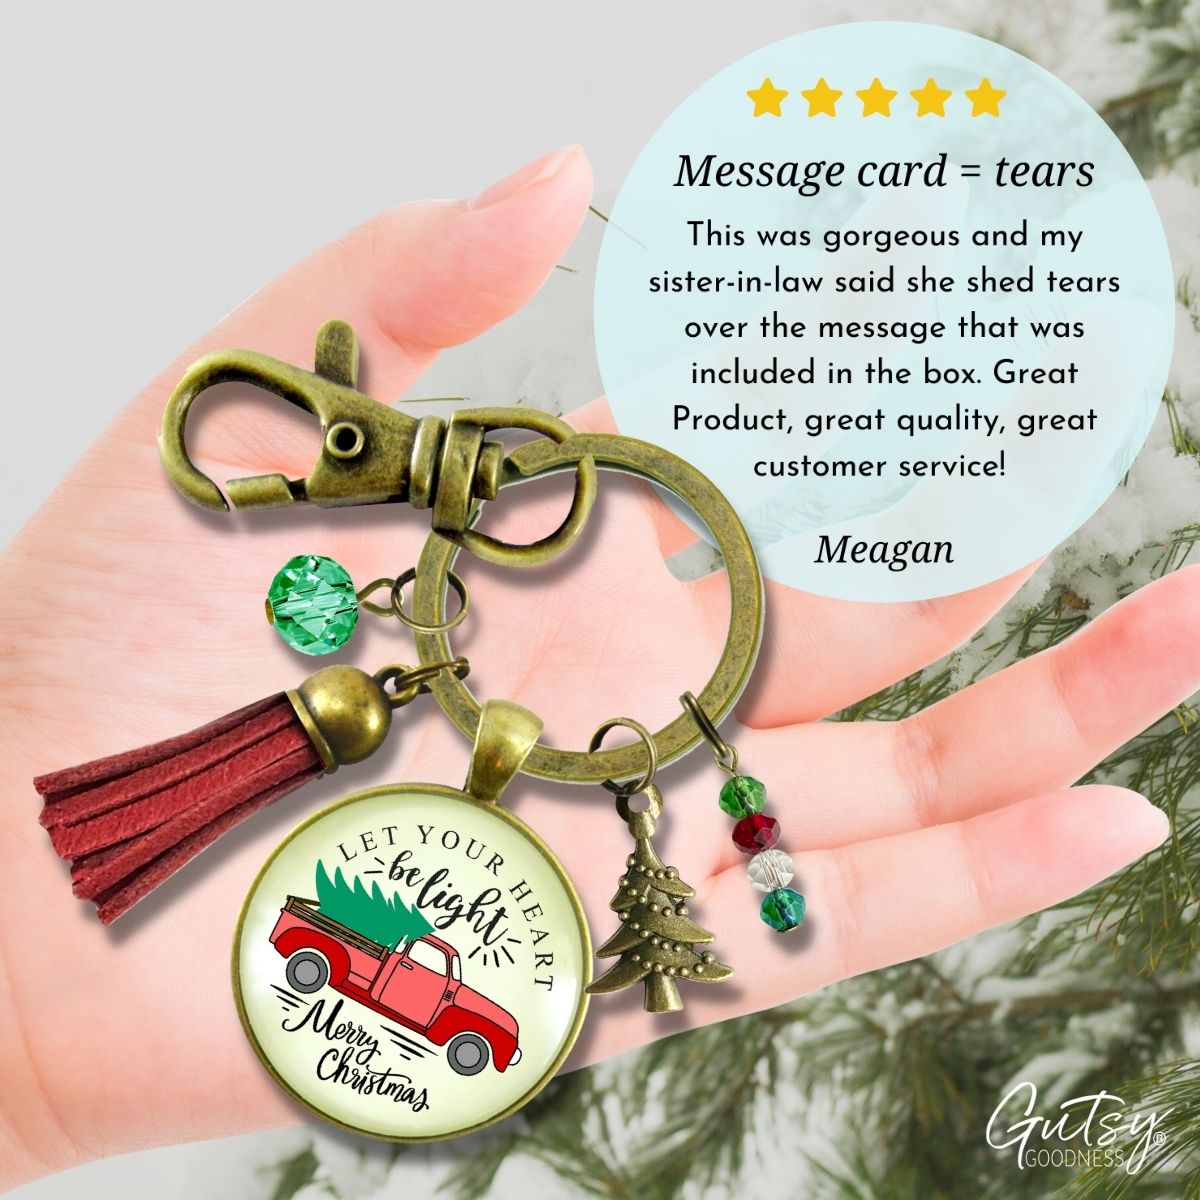 Red Truck Christmas Tree Keychain Handmade Holiday Let Your Heart Be Light Charm Gift Pendant Tassel Key Ring Jewelry   - Gutsy Goodness Handmade Jewelry